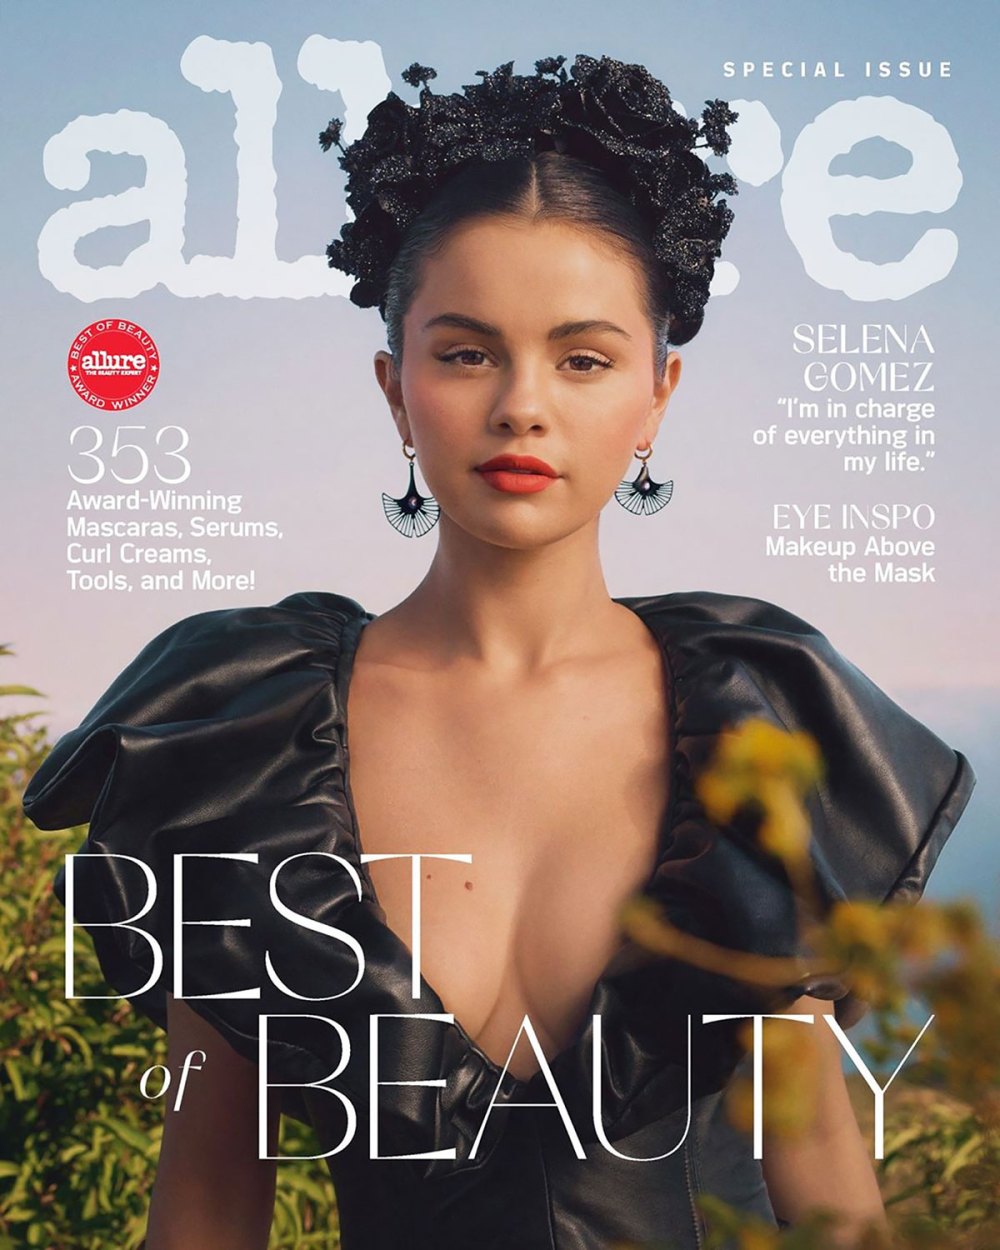 Selena Gomez Was a 'Little Stressed' Doing Her Own Makeup for 'Allure'